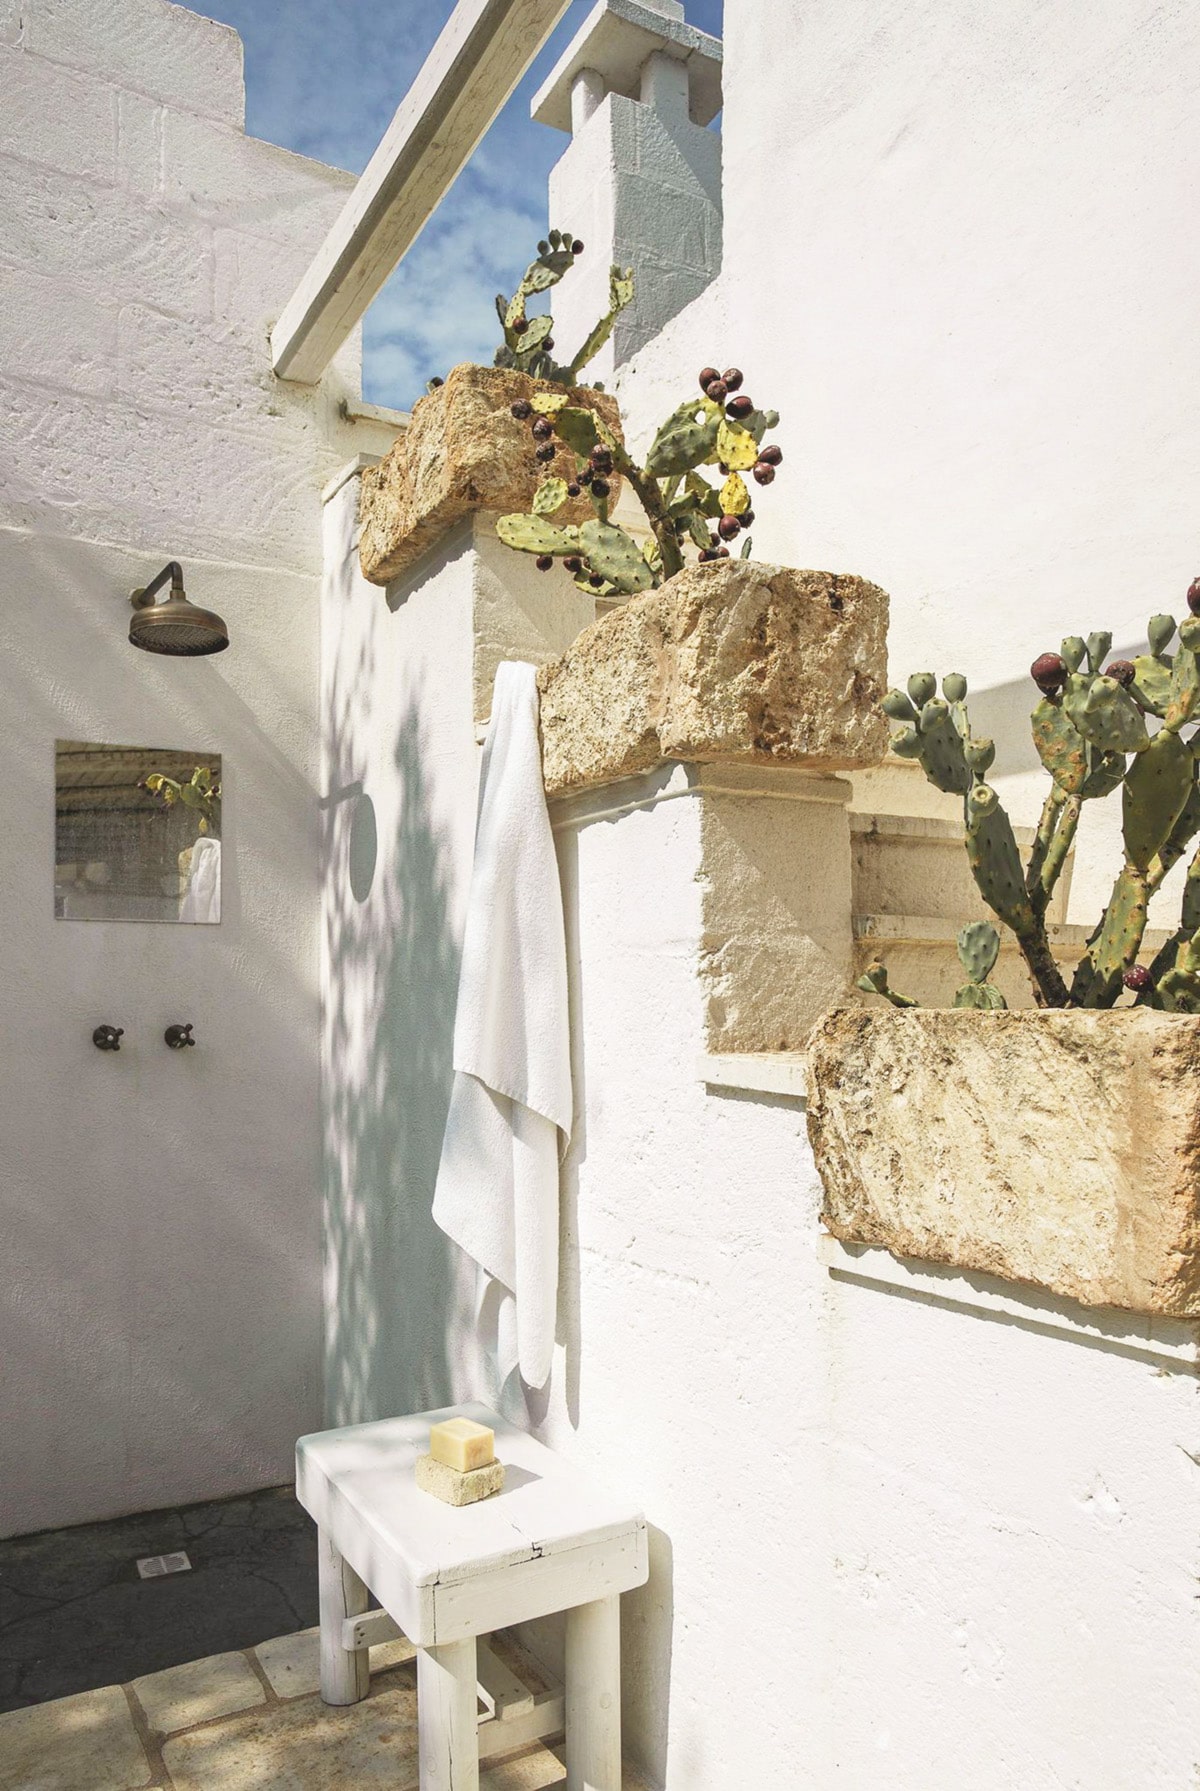 an outdoor shower in this vacation home in italy | coco kelley